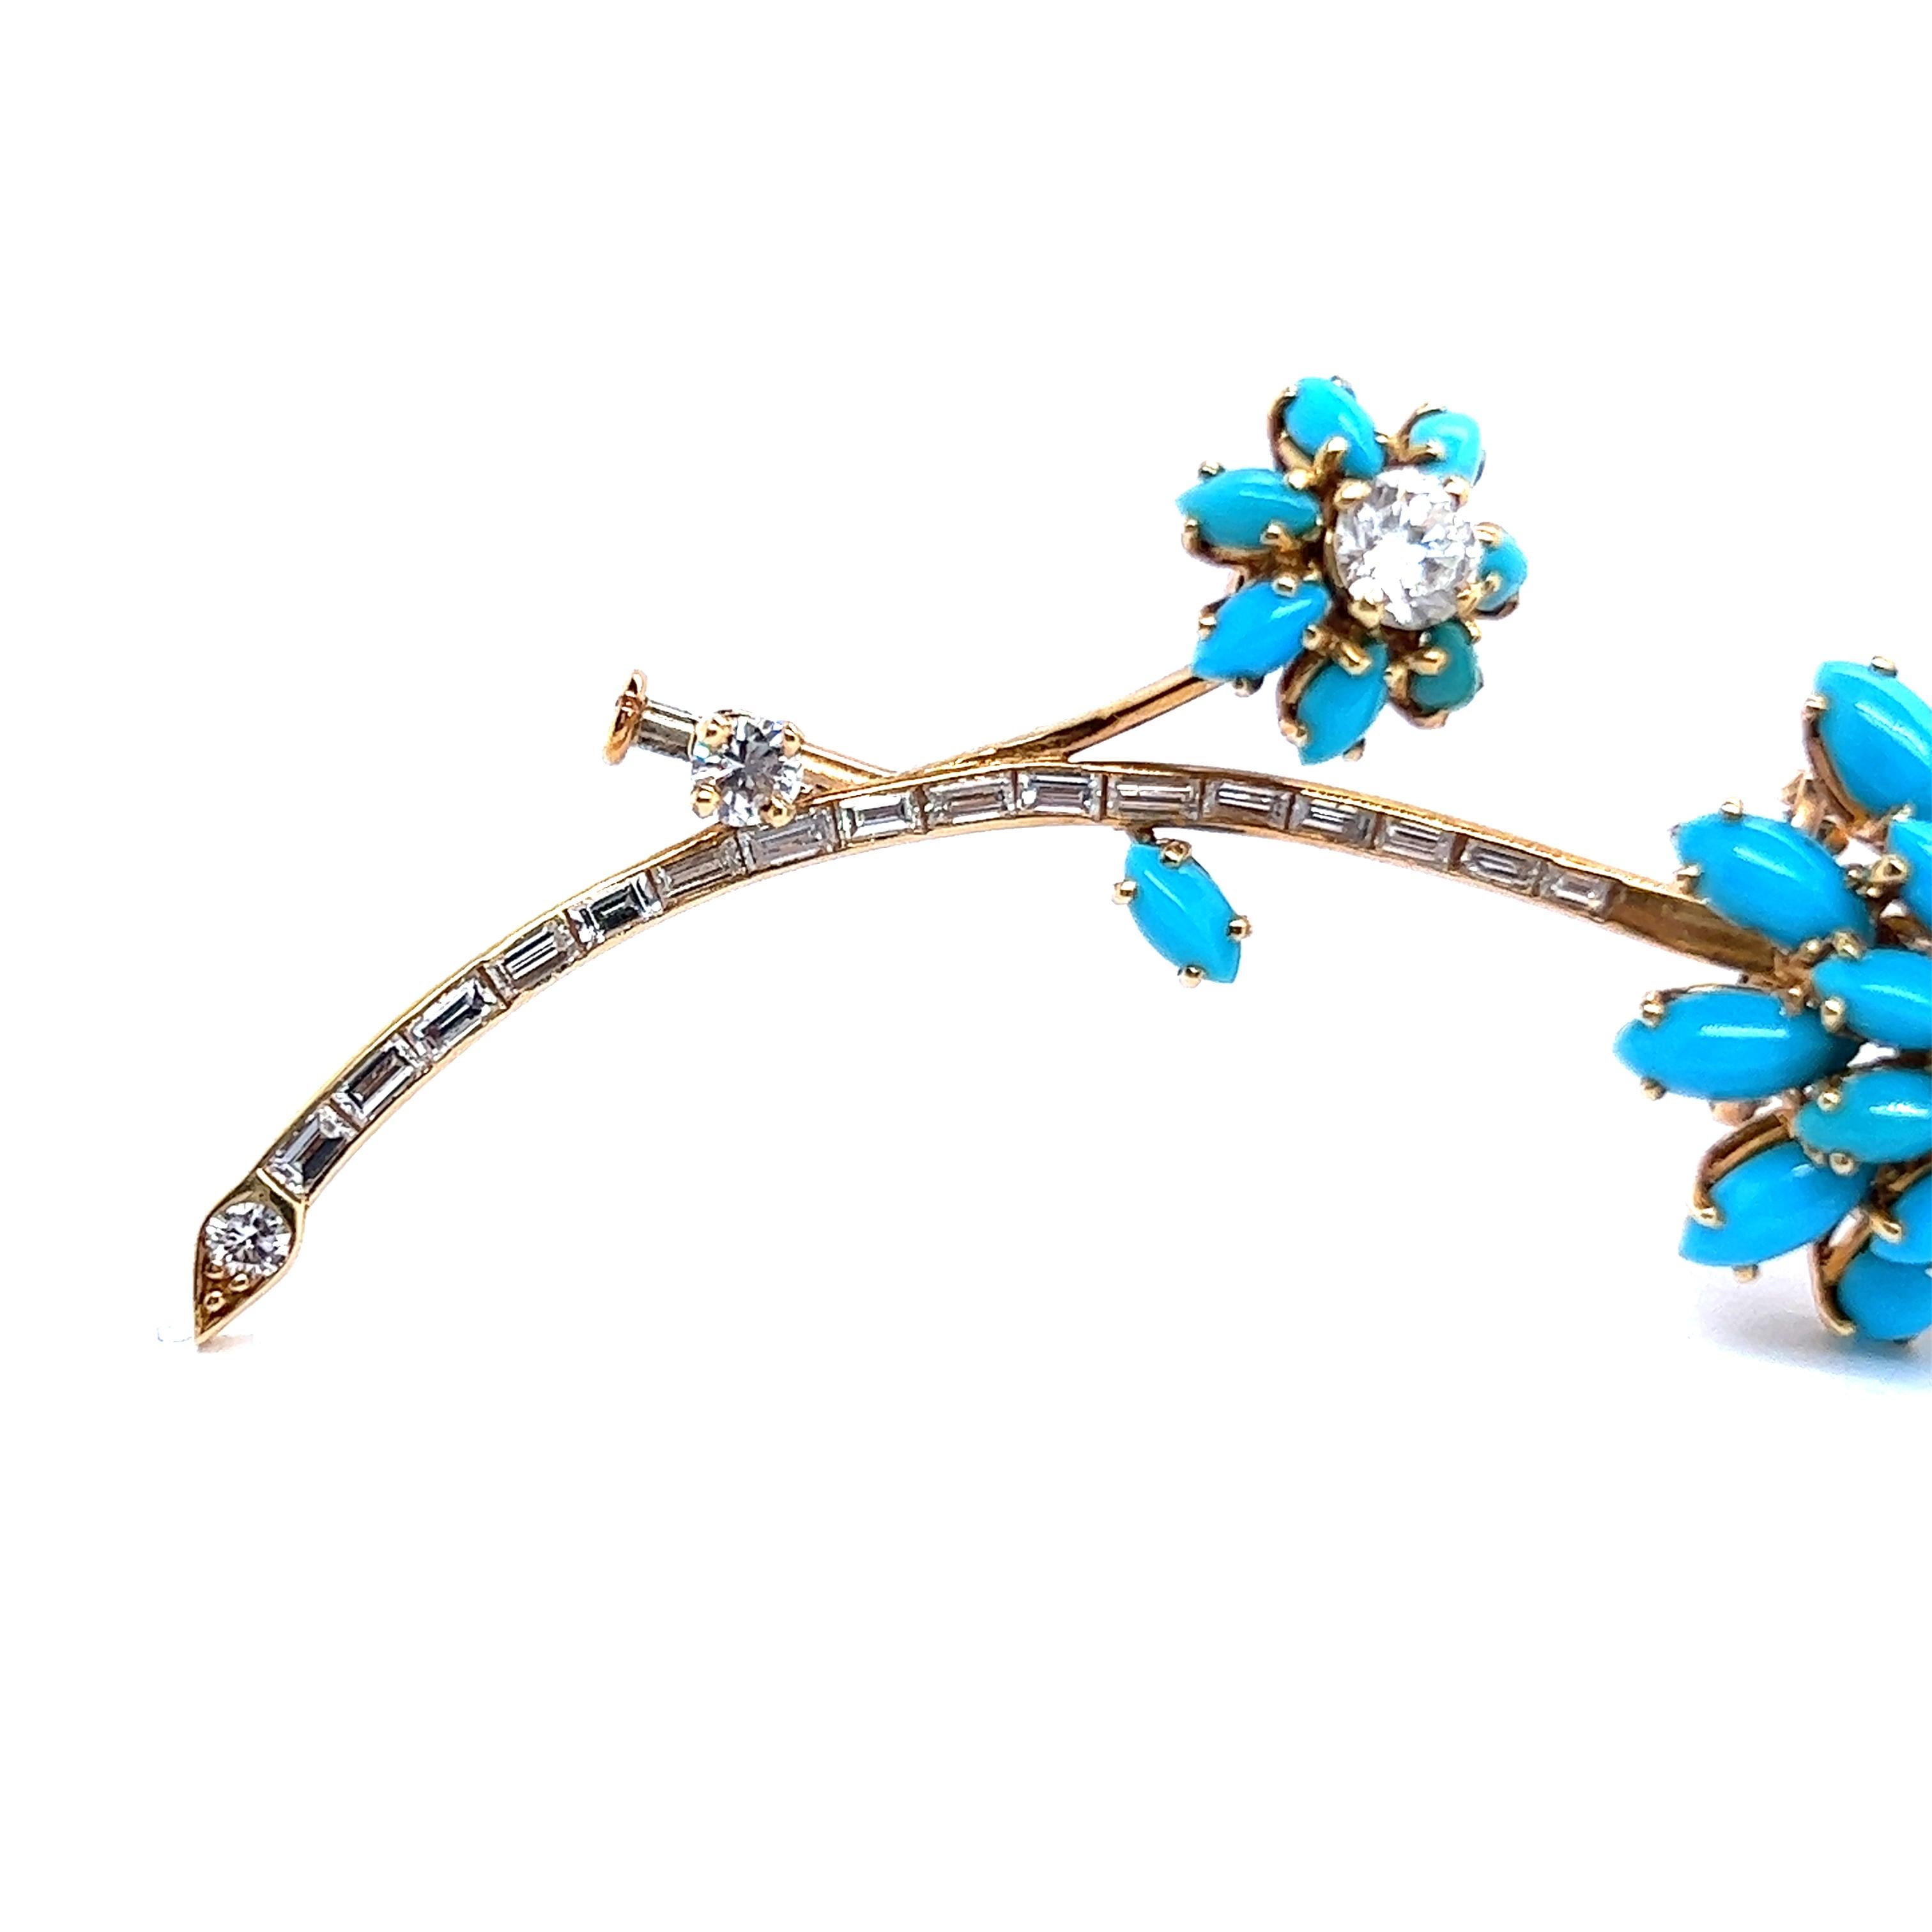 Artist Flower Brooch with Turquoise and Diamonds in 18 Karat Yellow Gold